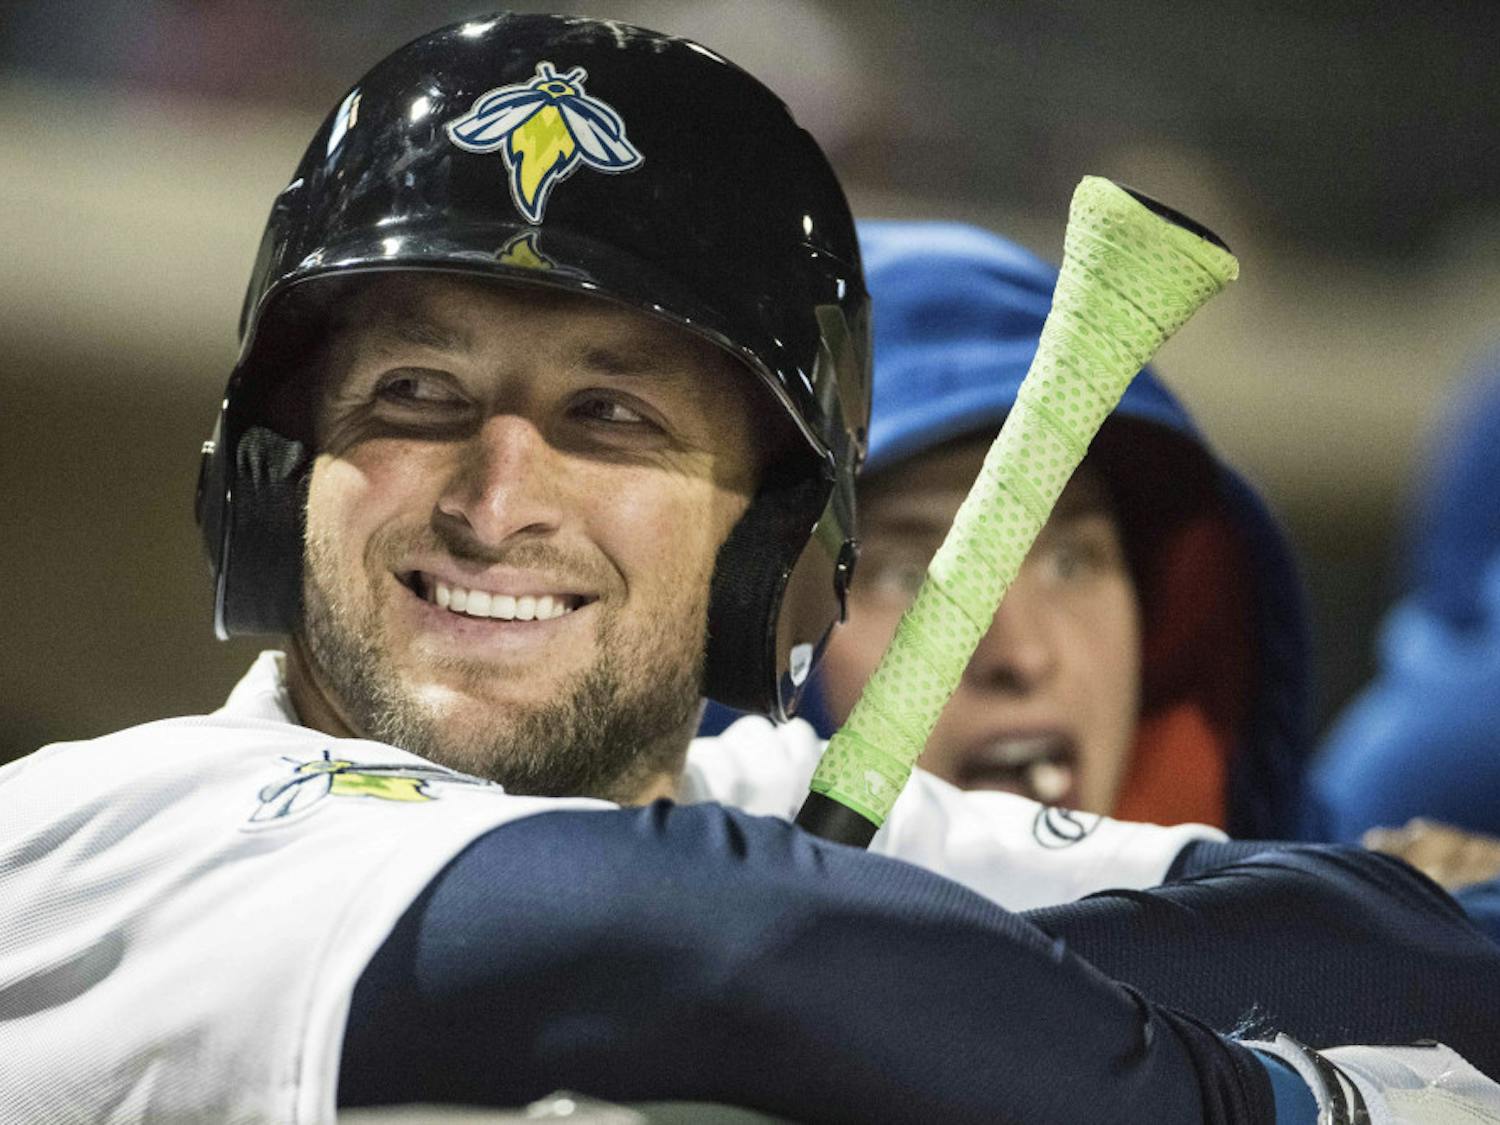 Columbia Firefly outfielder Tim Tebow shares a smile with fans during a Class A minor league baseball game against the Augusta GreenJackets on Thursday, April 6, 2017, in Columbia, S.C. Columbia defeated Augusta 14-7. (AP Photo/Sean Rayford)